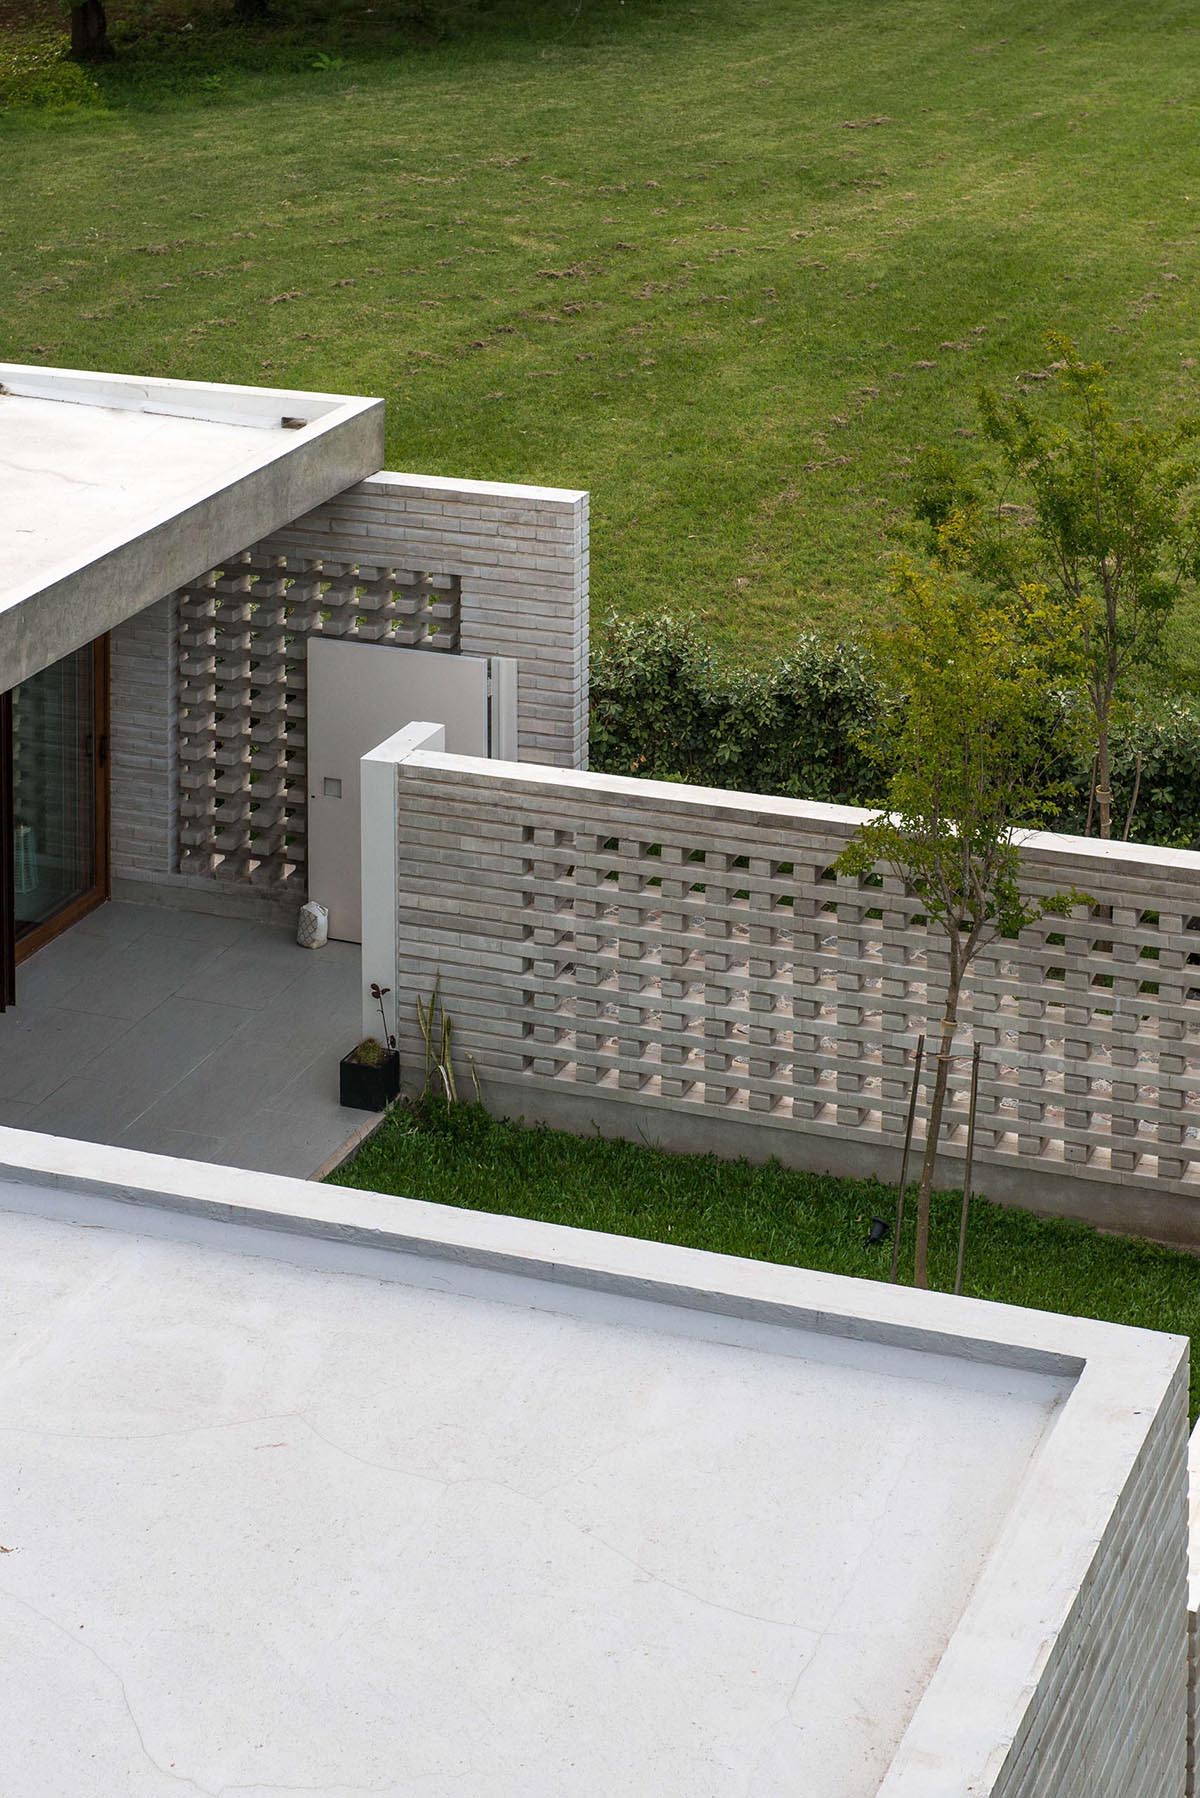 A closeup look at a concrete block wall that provides privacy for a modern home.